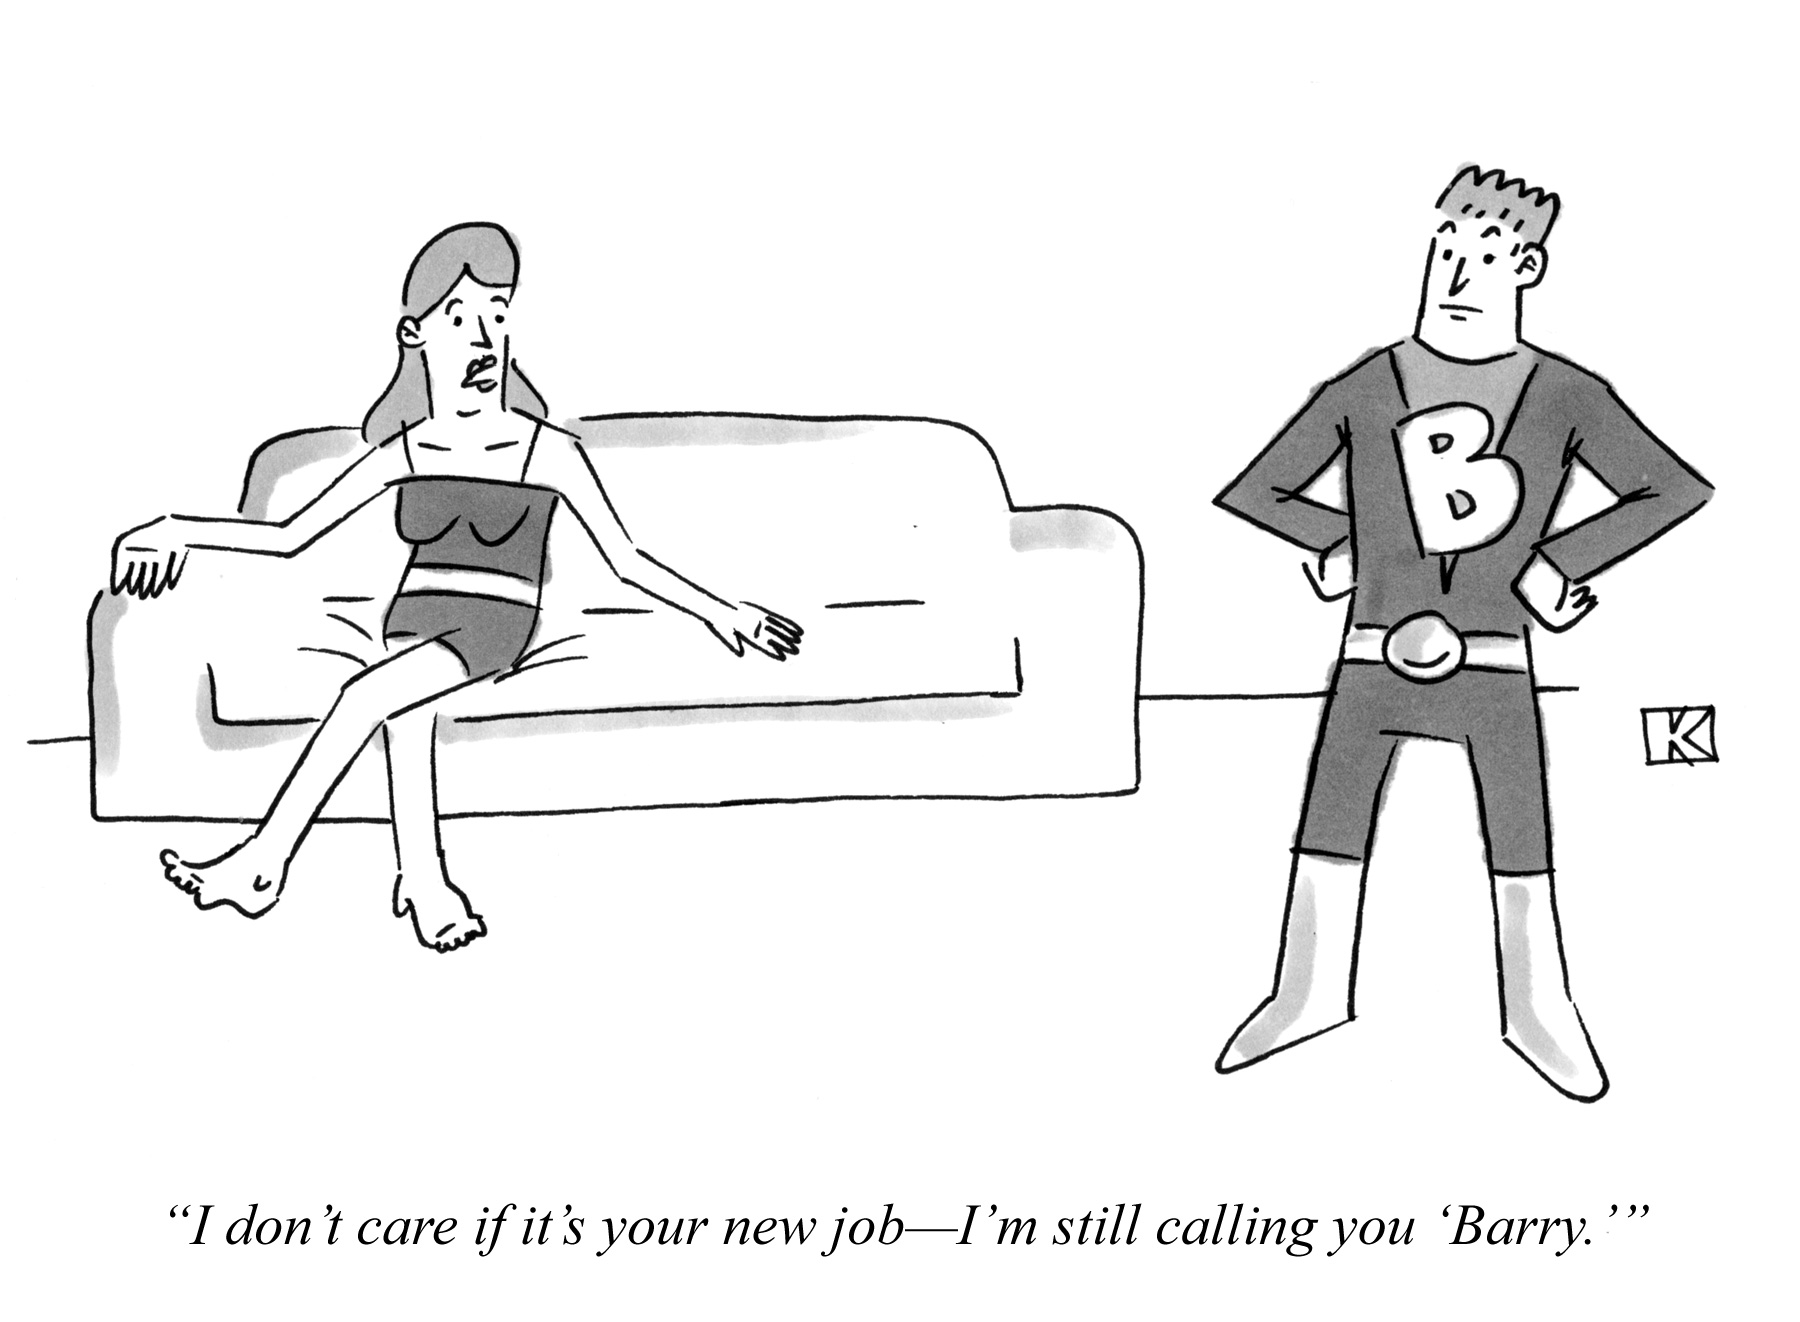 I don't care if it's your new job—I'm still calling you 'Barry.'